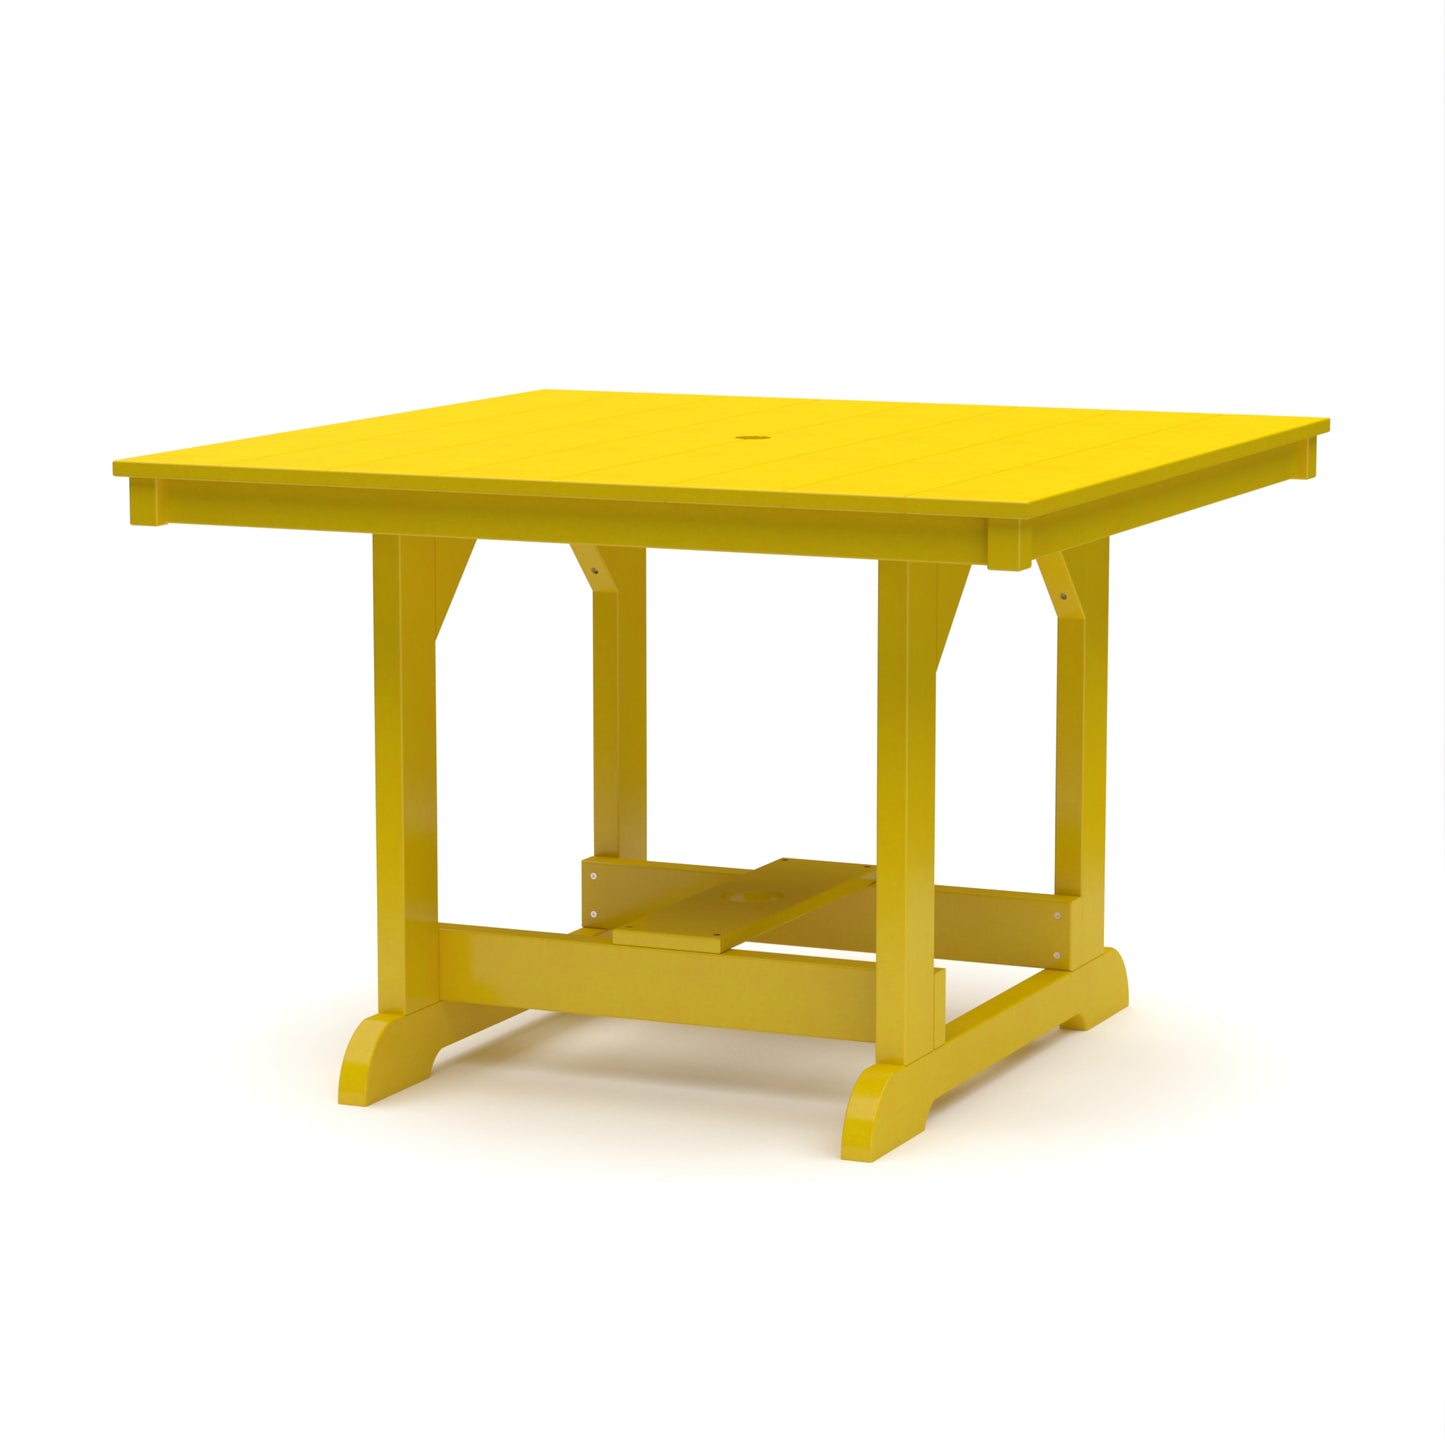 Wildridge Heritage Recycled Plastic Outdoor 44x44 Dining Table - LEAD TIME TO SHIP 6 WEEKS OR LESS